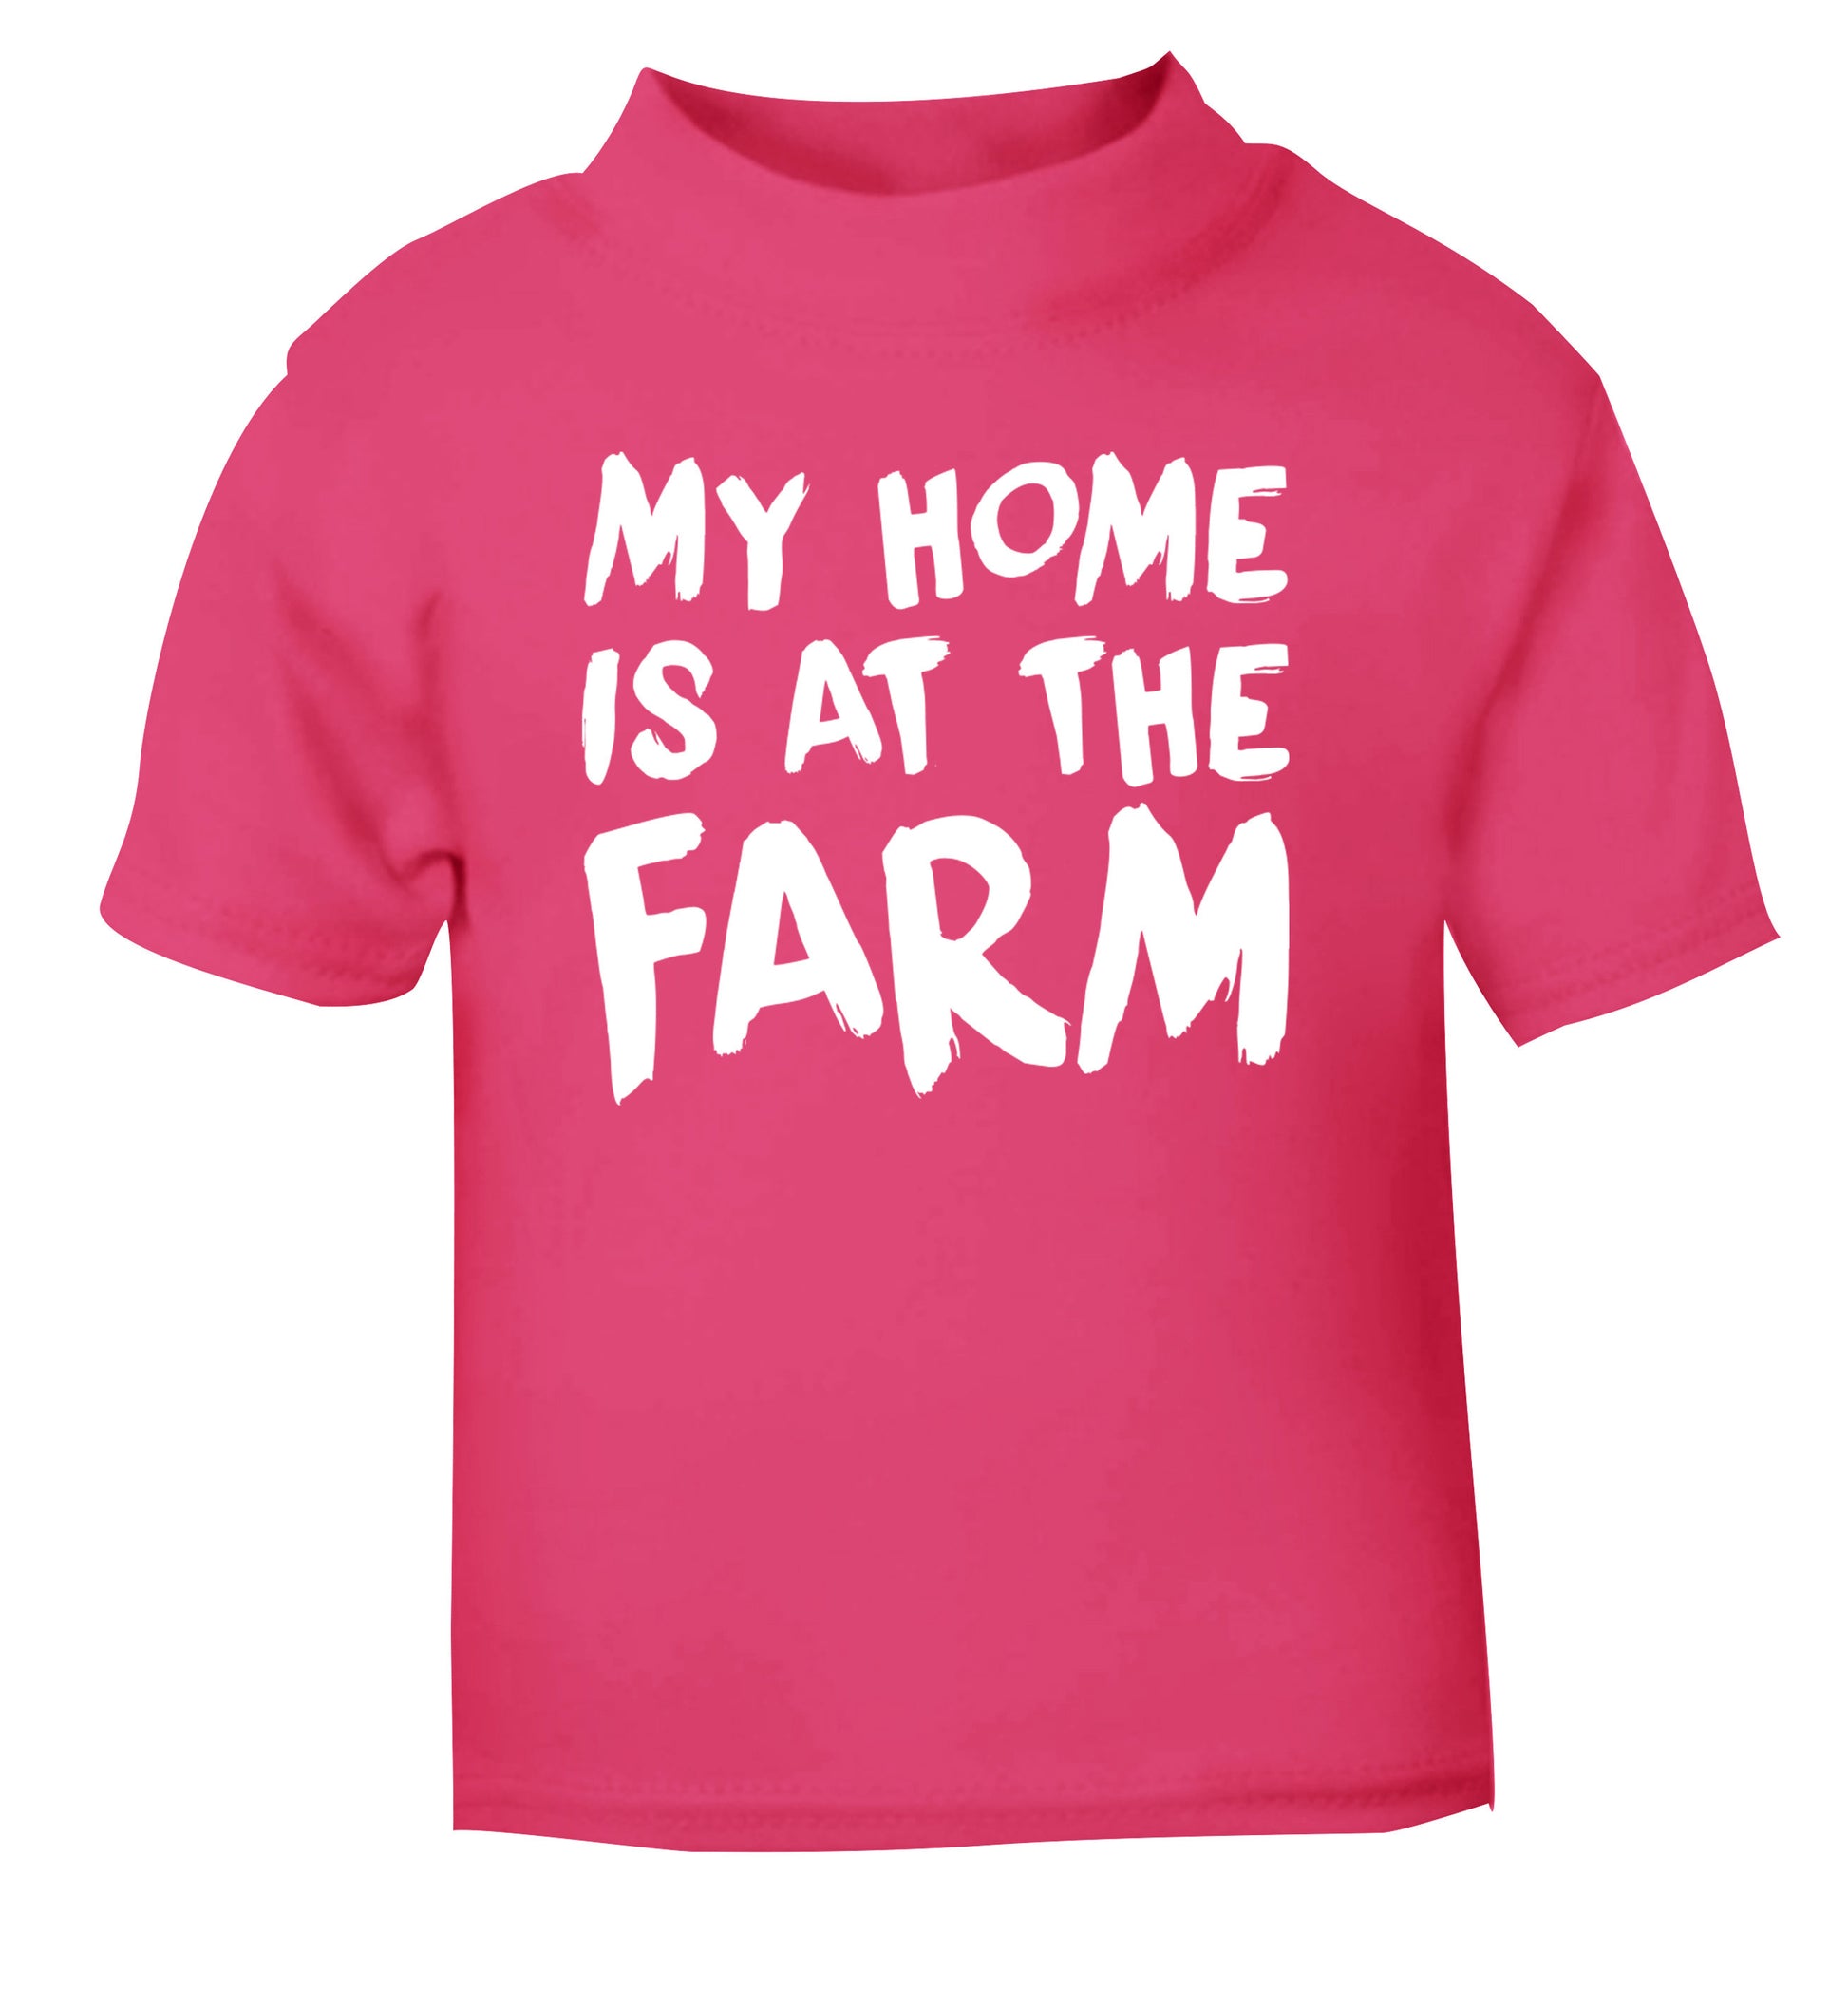 My home is at the farm pink Baby Toddler Tshirt 2 Years